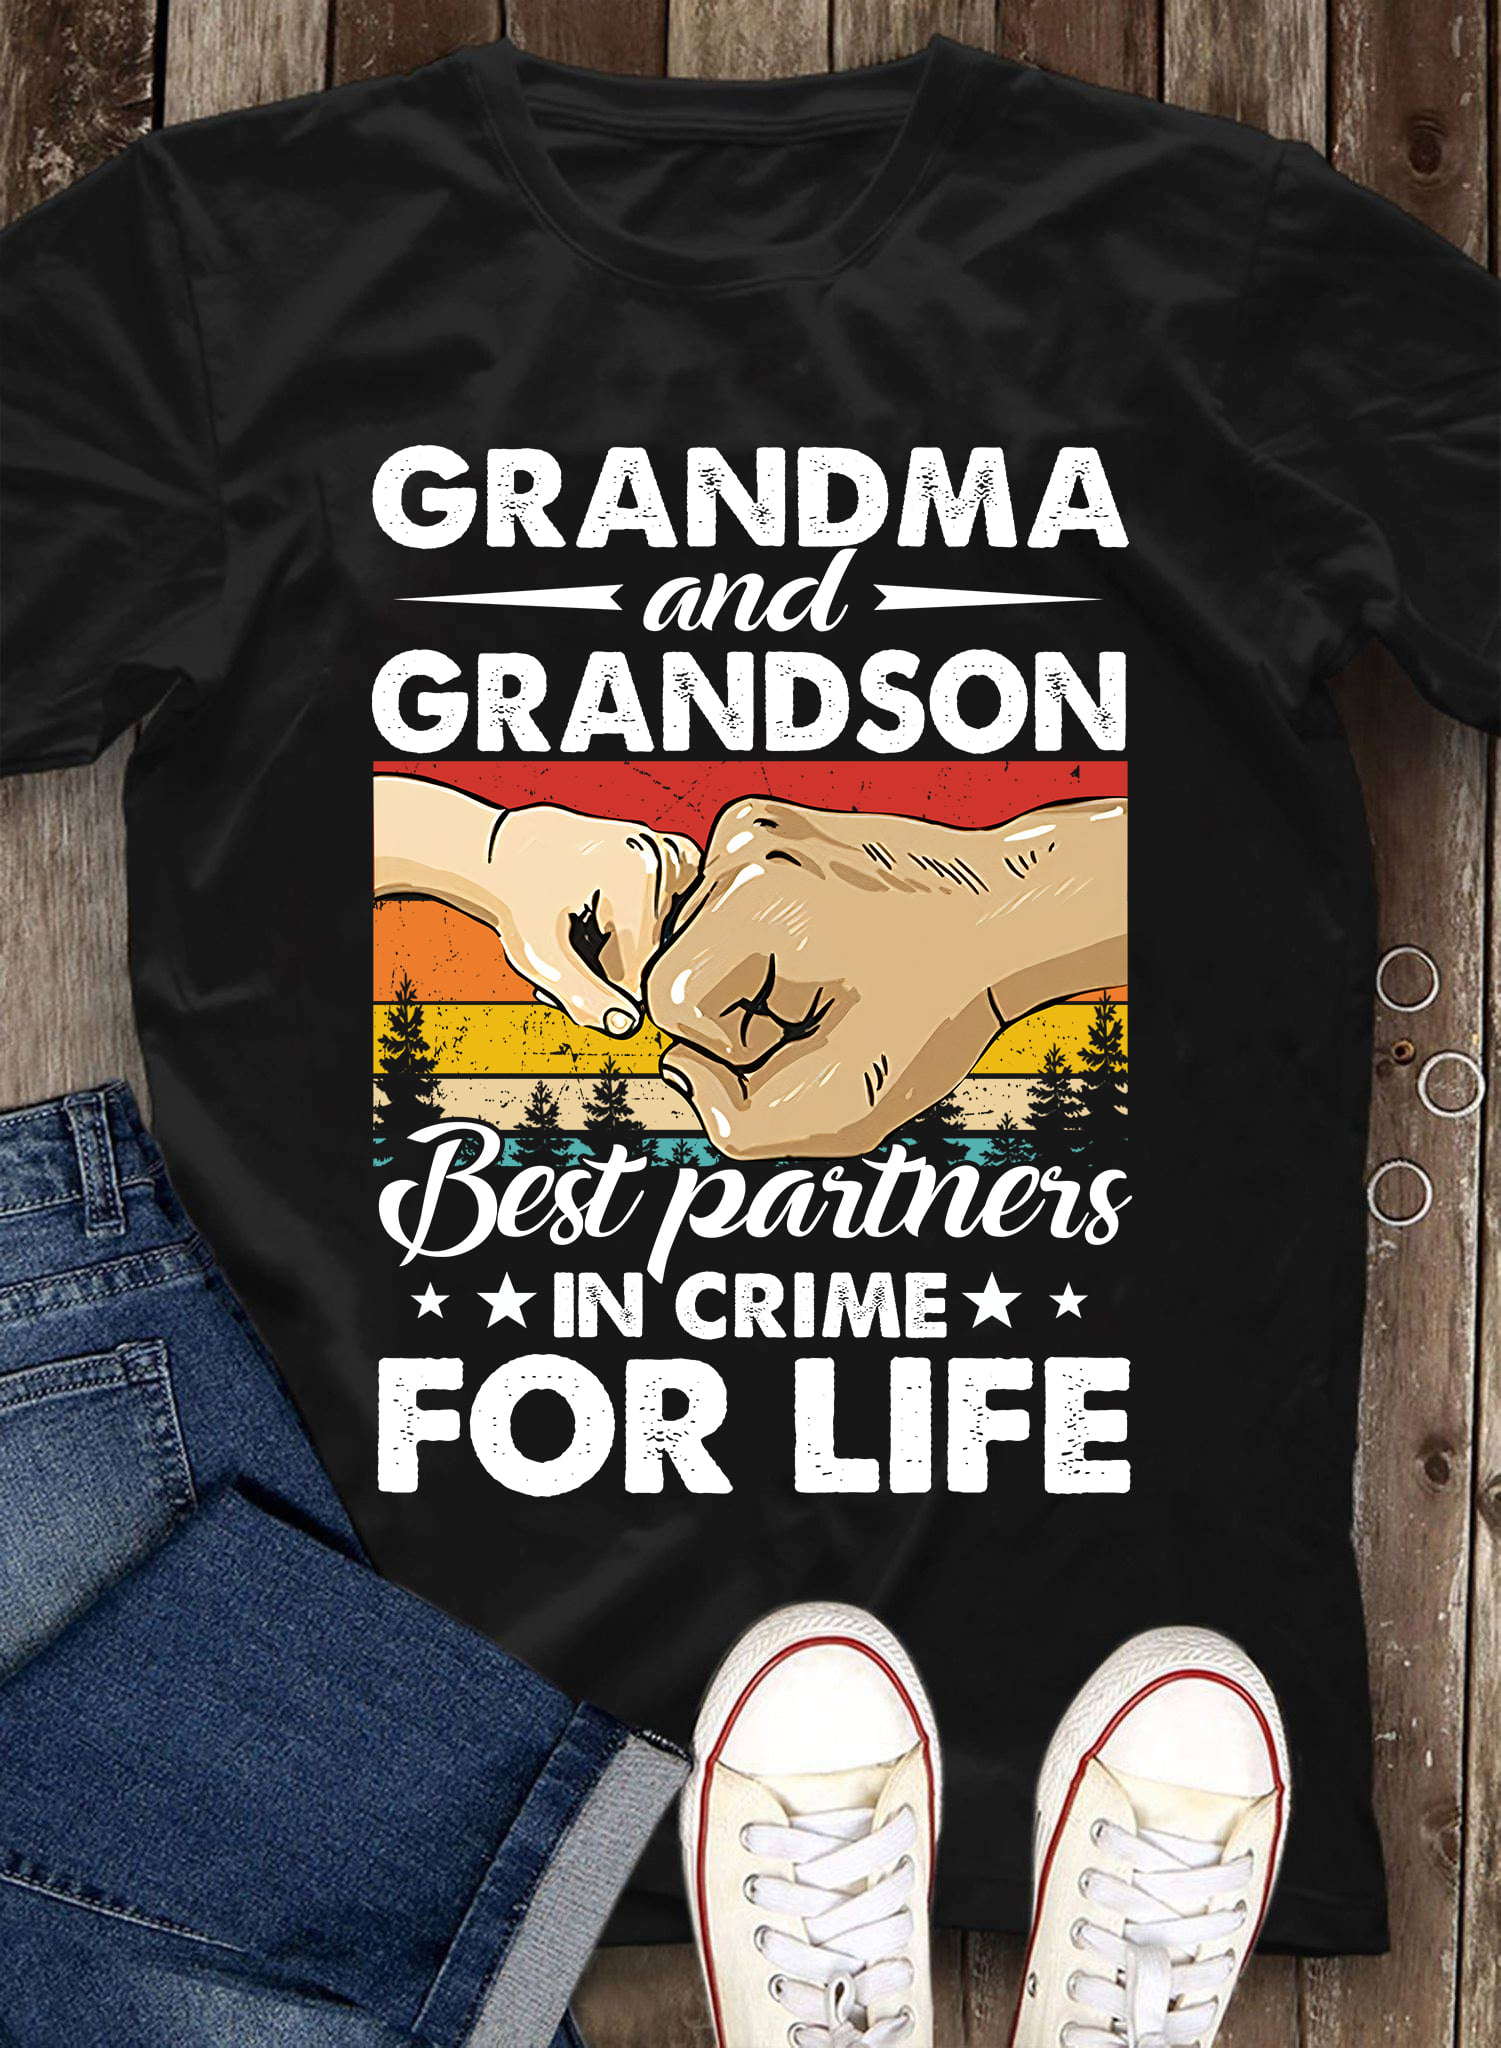 Grandma and grandson best partners in crime for life